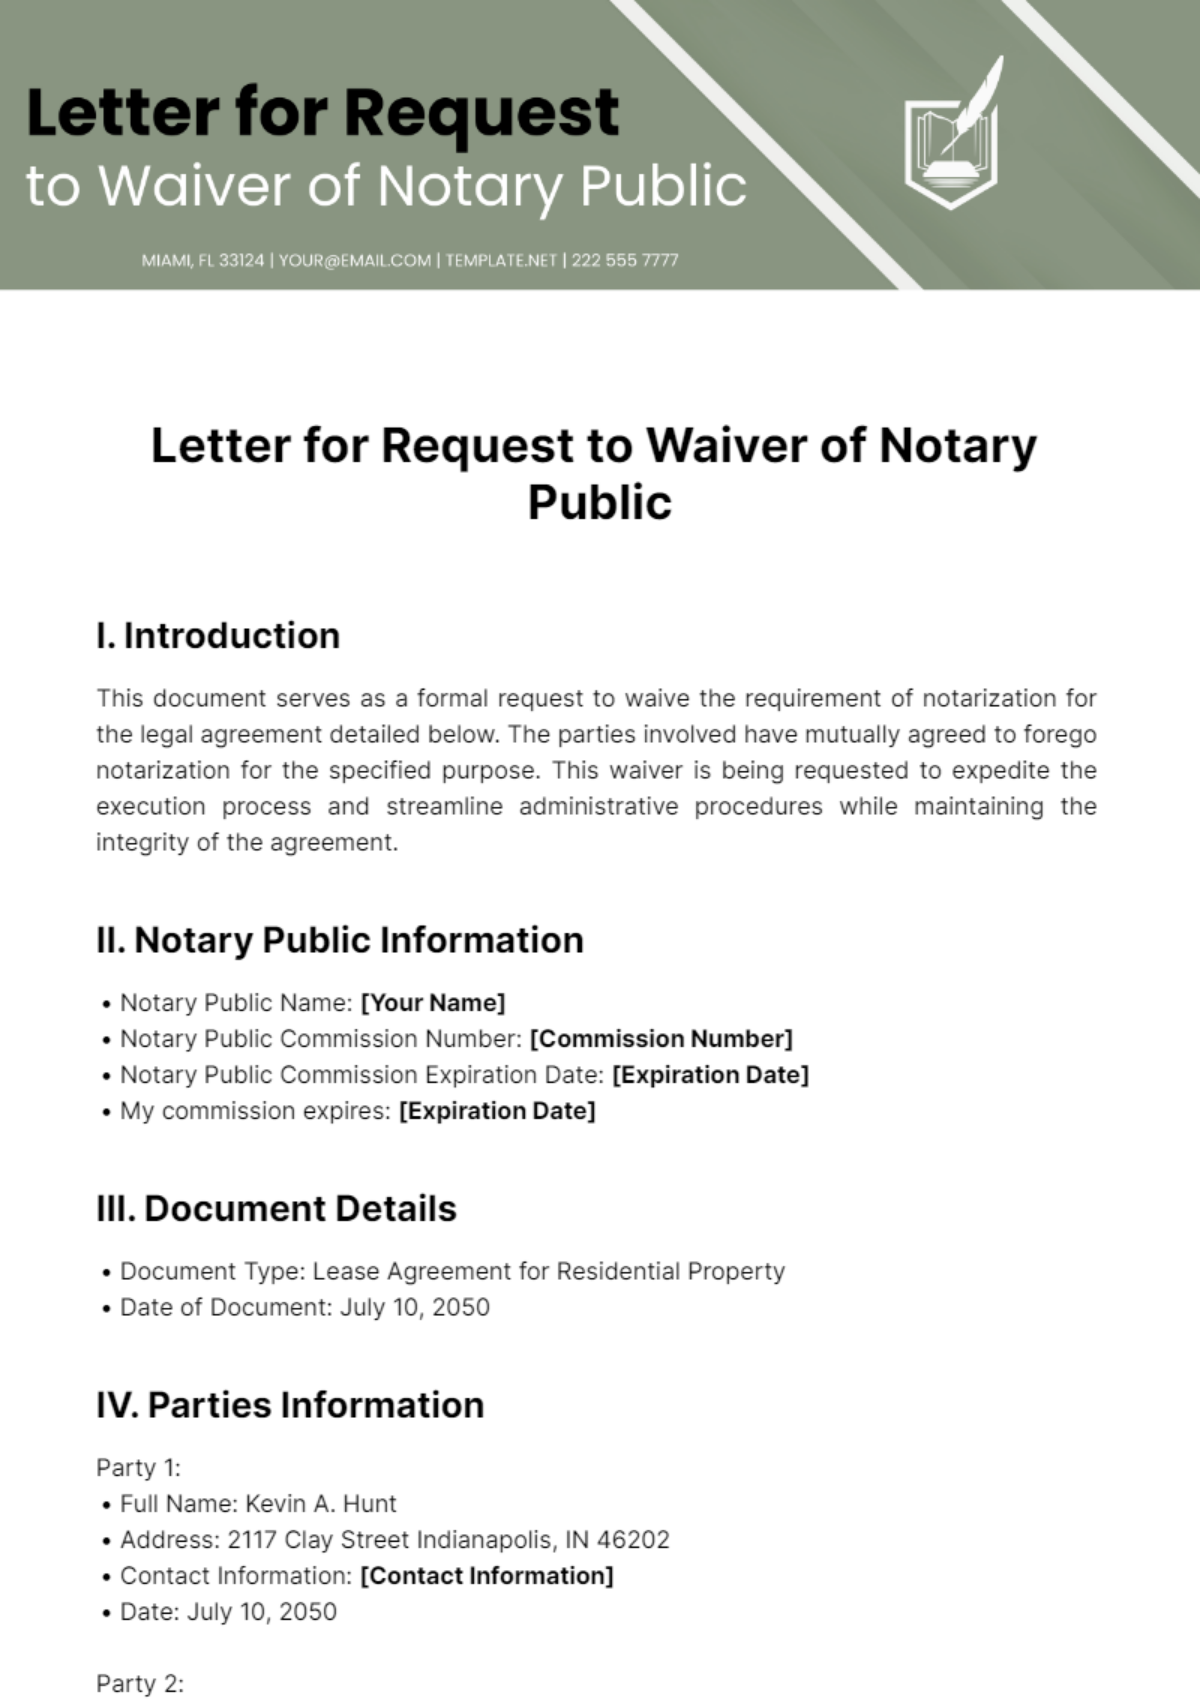 Free Letter for Request to Waiver of Notary Public Template